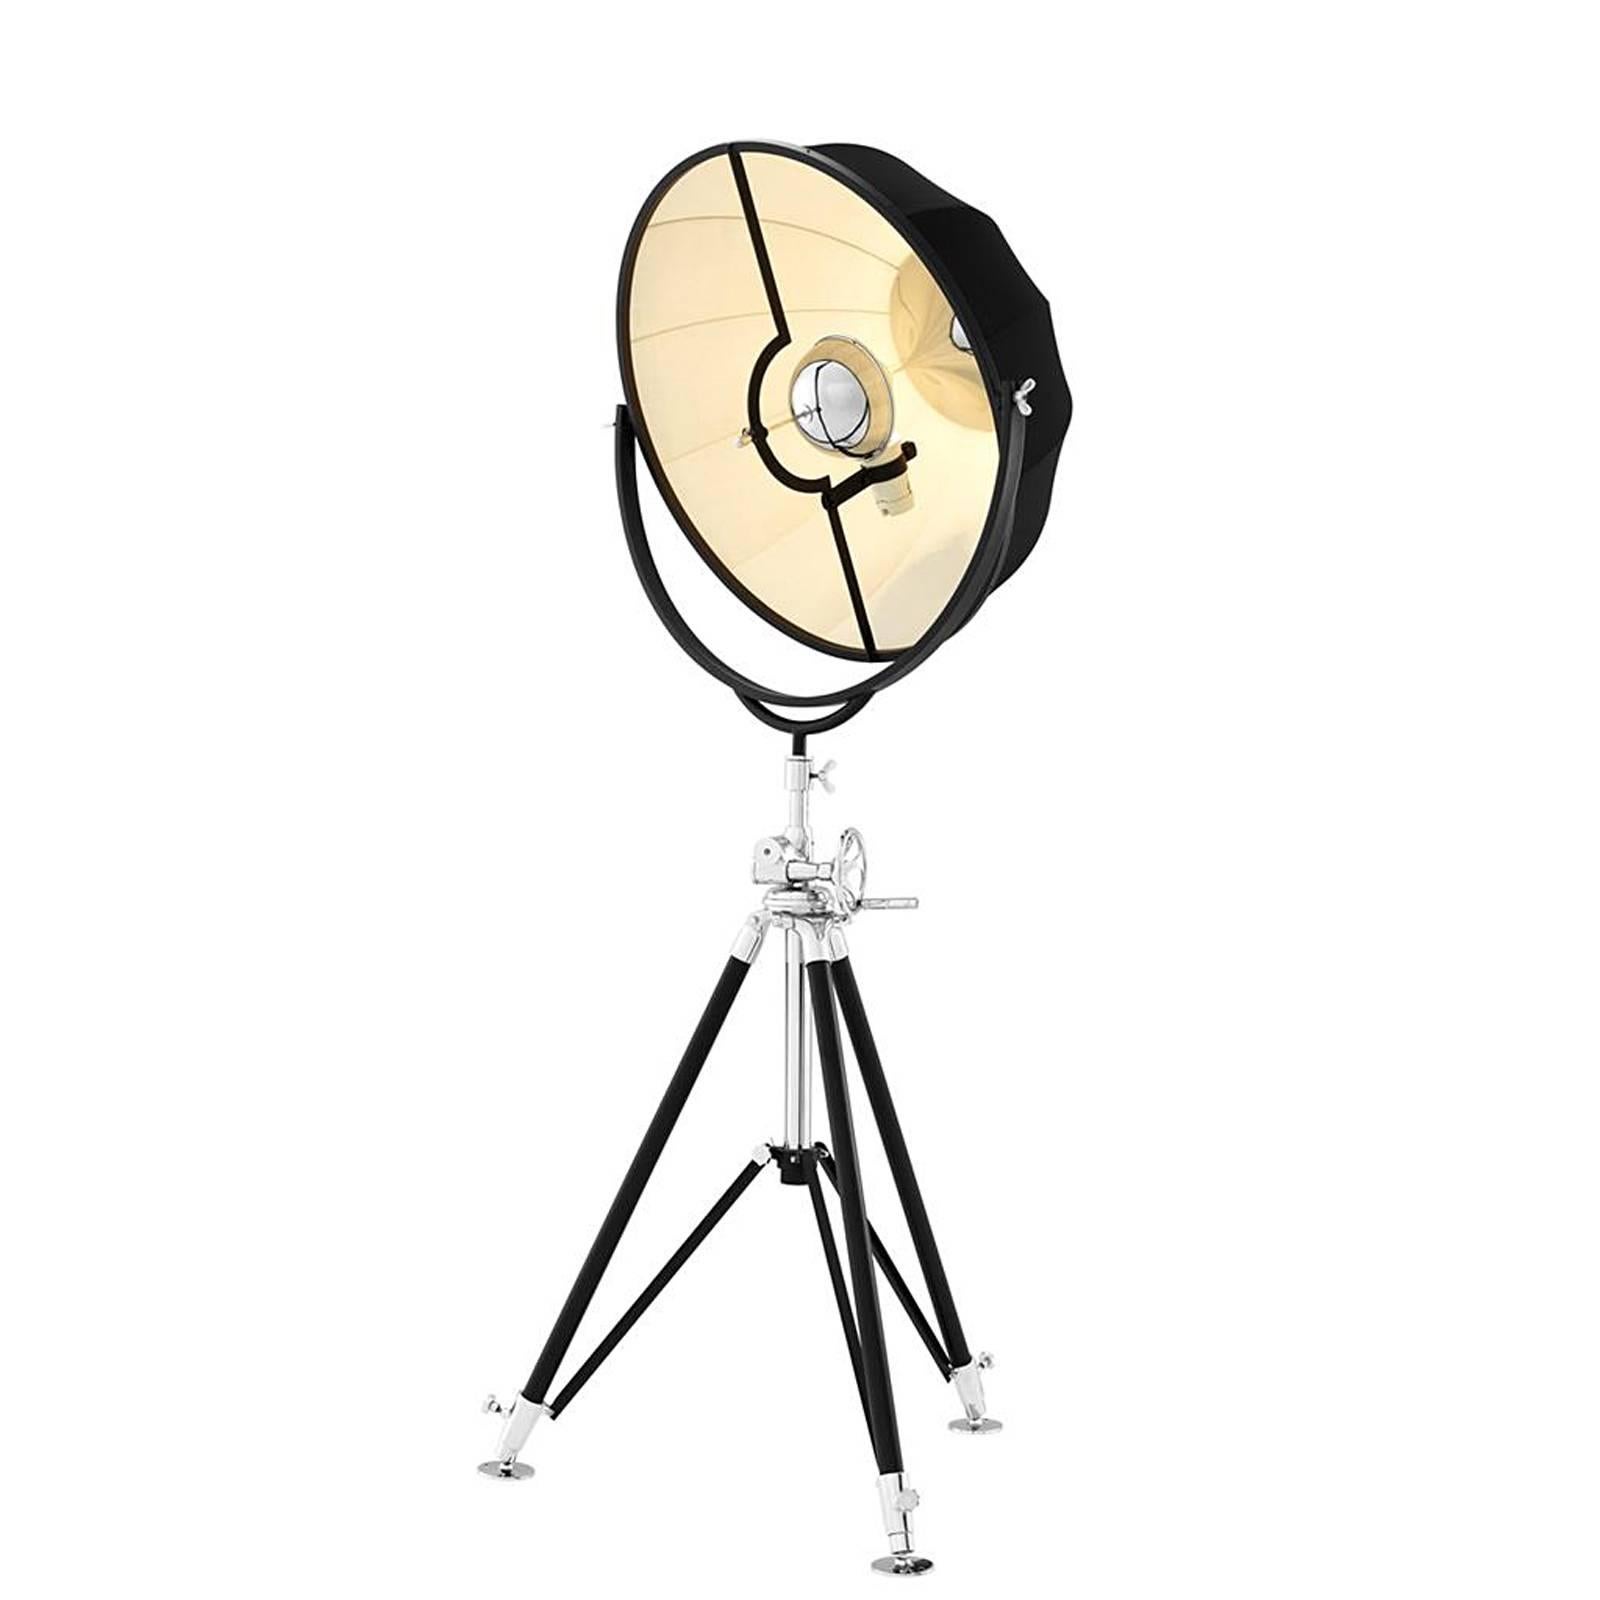 Indian Photo Floor Lamp in Polished Nickel and Black Finish